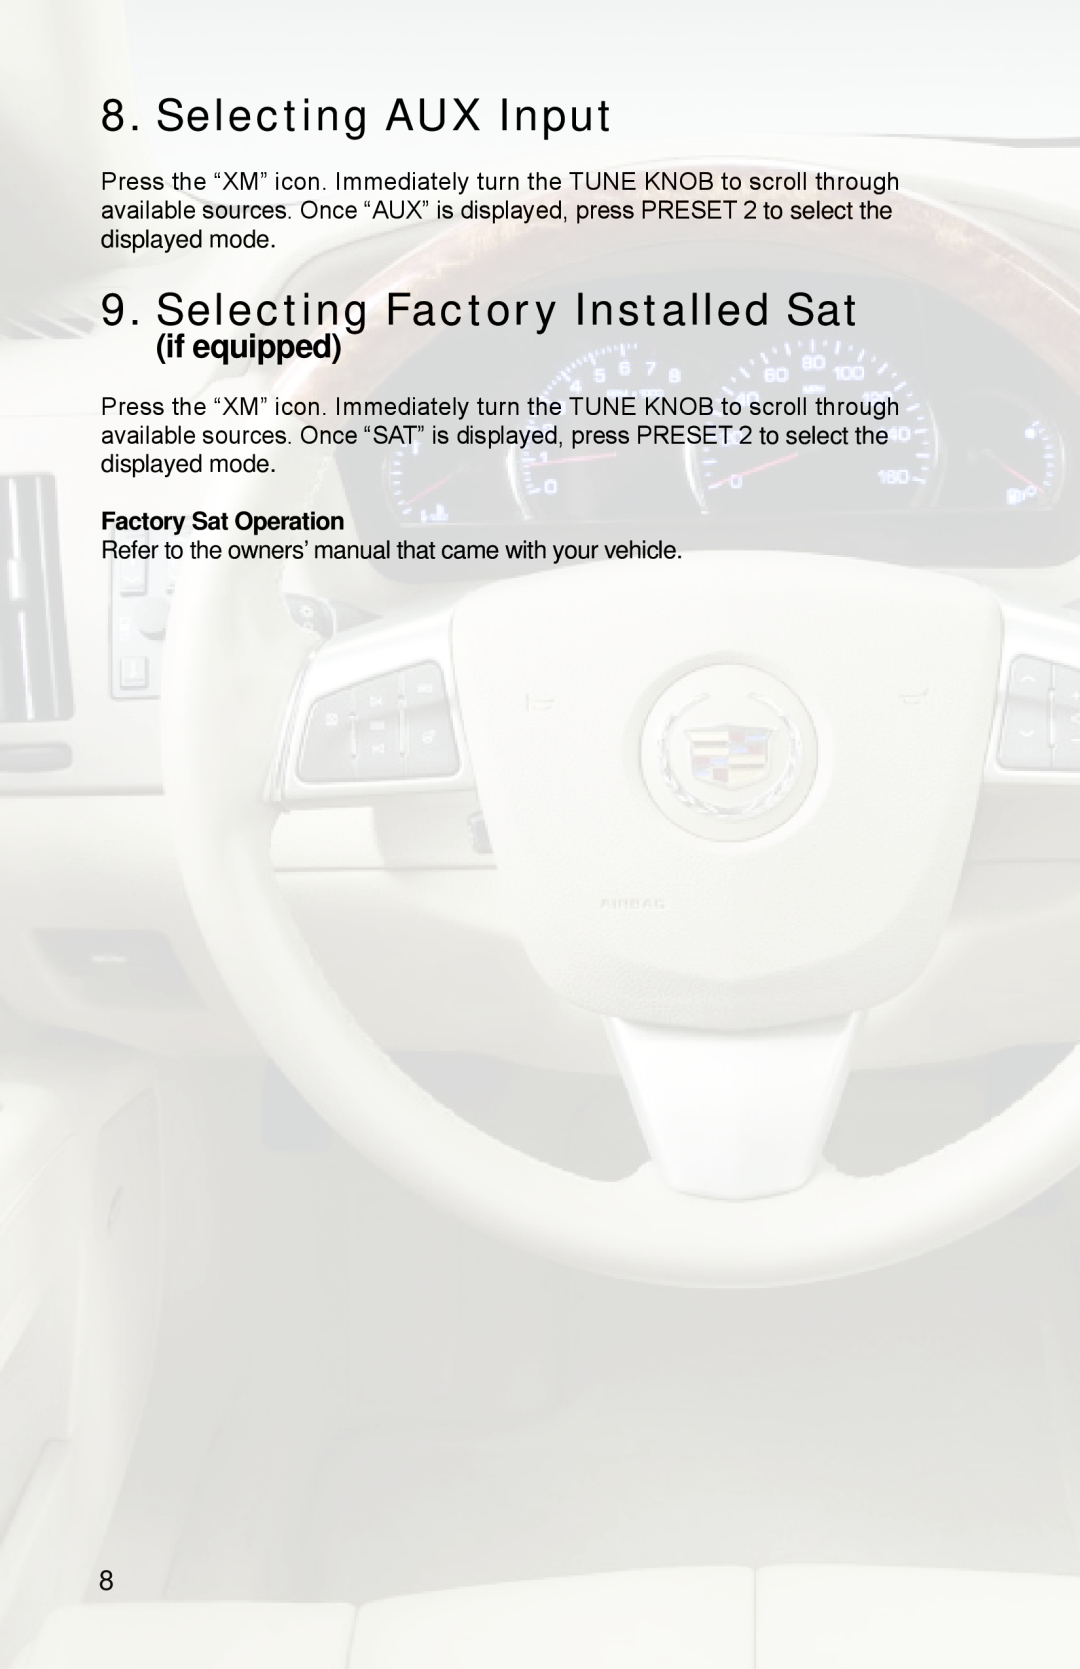 iSimple PGHGM4 owner manual Selecting AUX Input, Selecting Factory Installed Sat, if equipped 